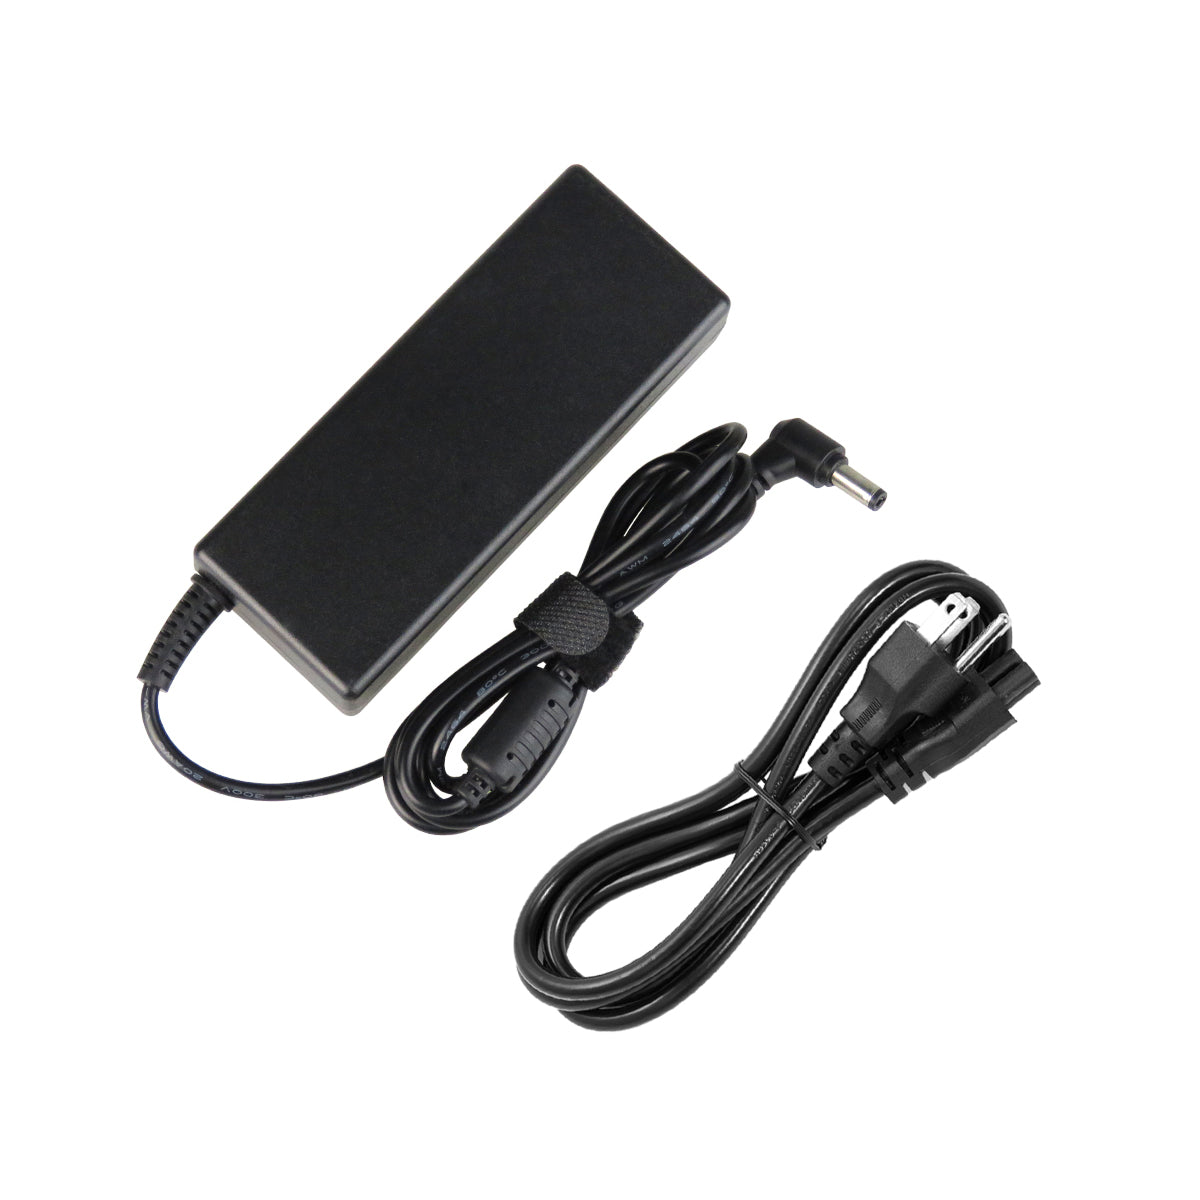 AC Adapter Charger for ASUS X75a Notebook.